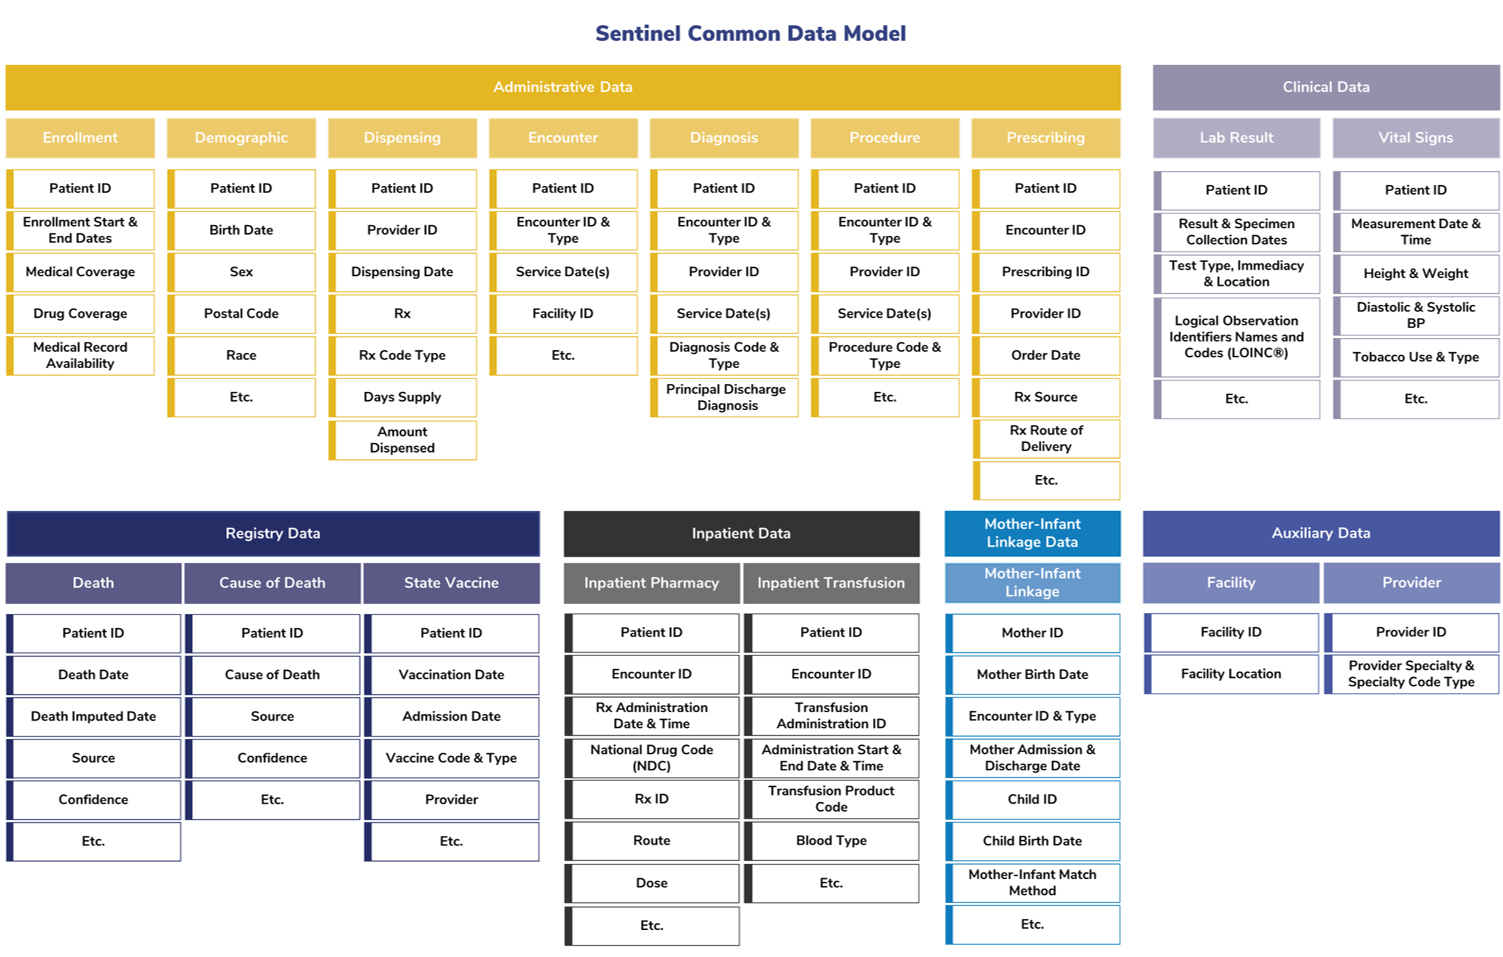 Diagram/table of the structure of the Sentinel Common Data Model